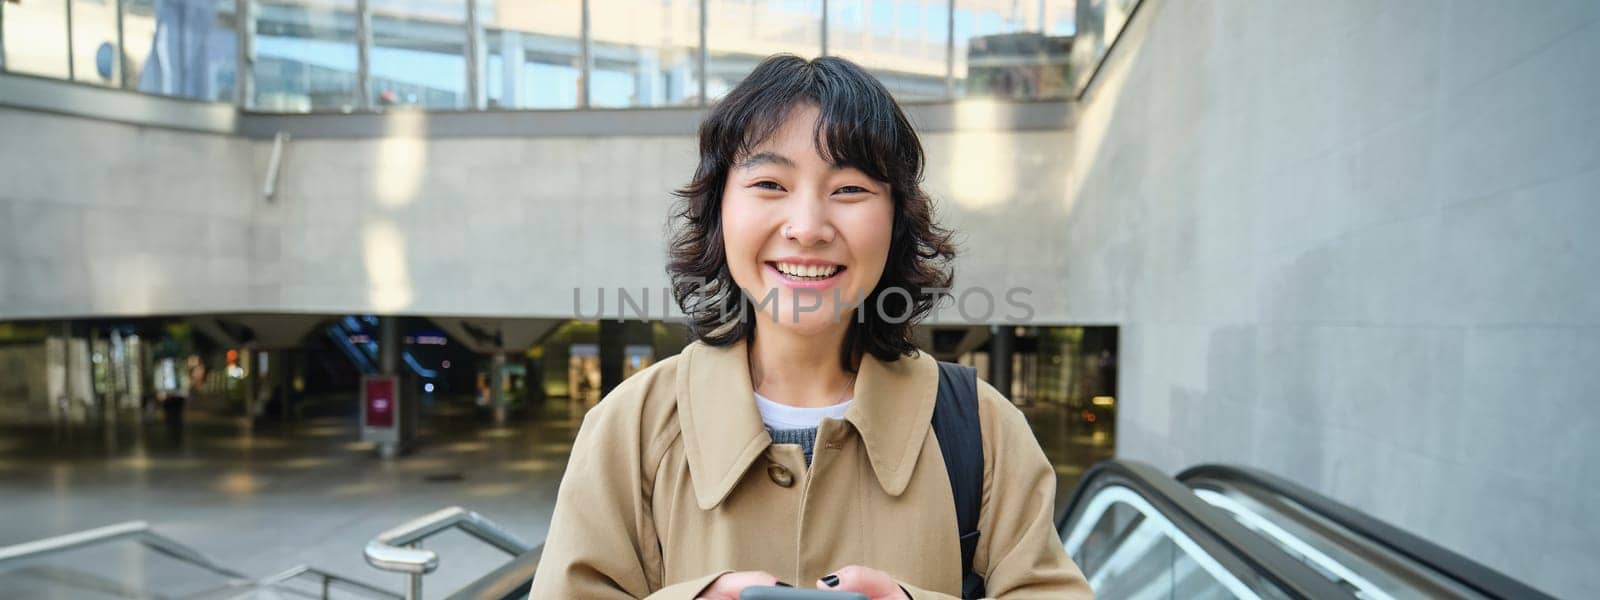 People in city. Young korean woman travels around city, goes up the escalator, uses her mobile phone and smiles.